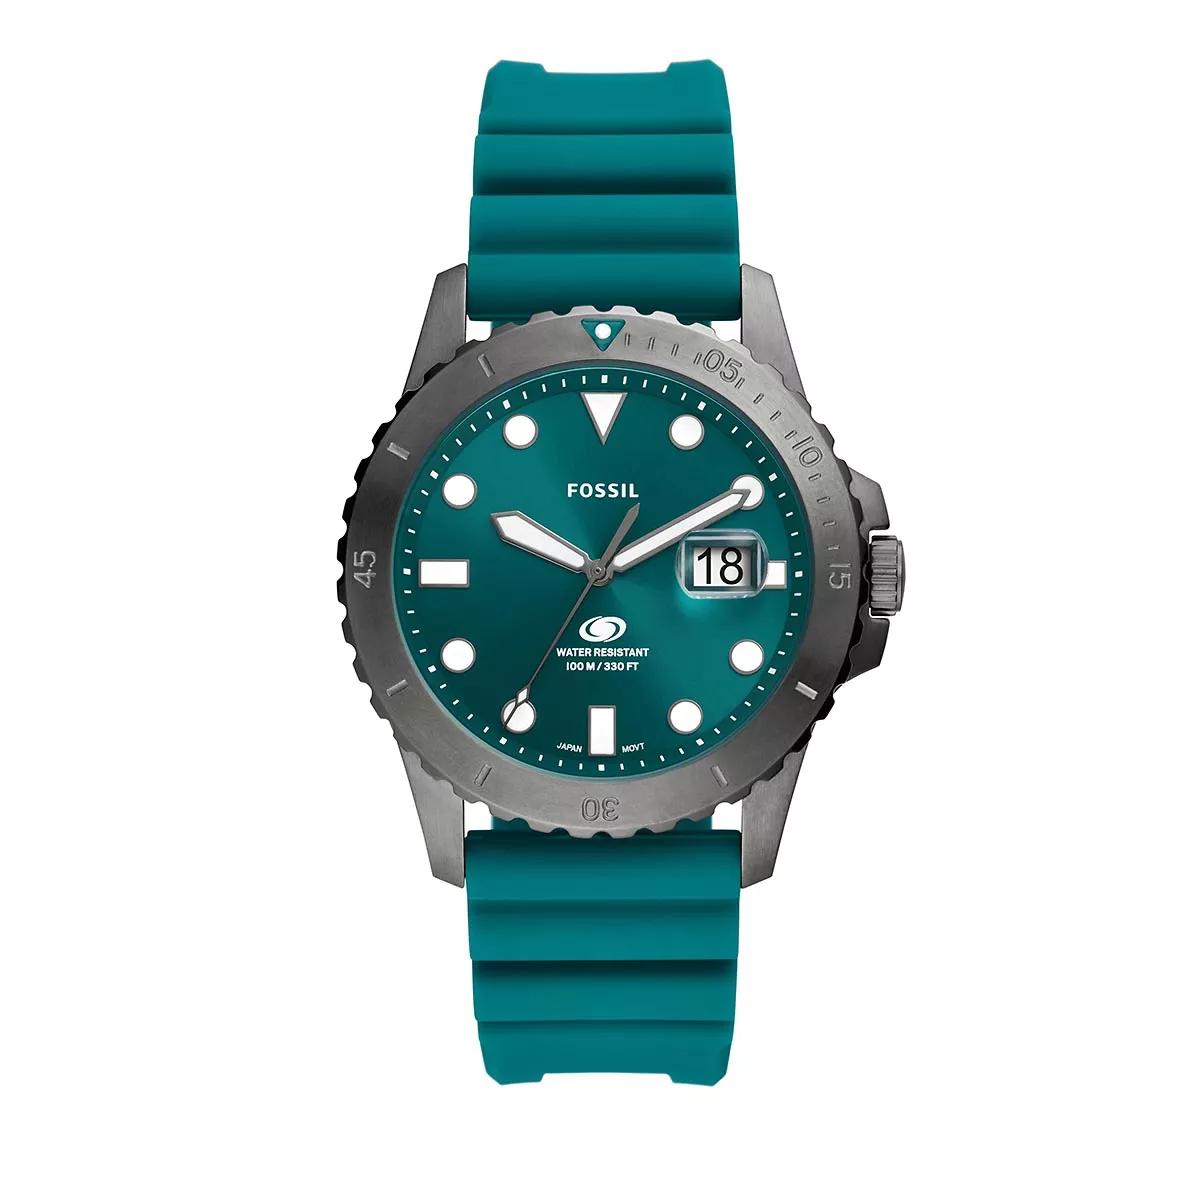 Fossil Fossil Blue Three-Hand Date Silicone Watch Oasis | Quarz-Uhr